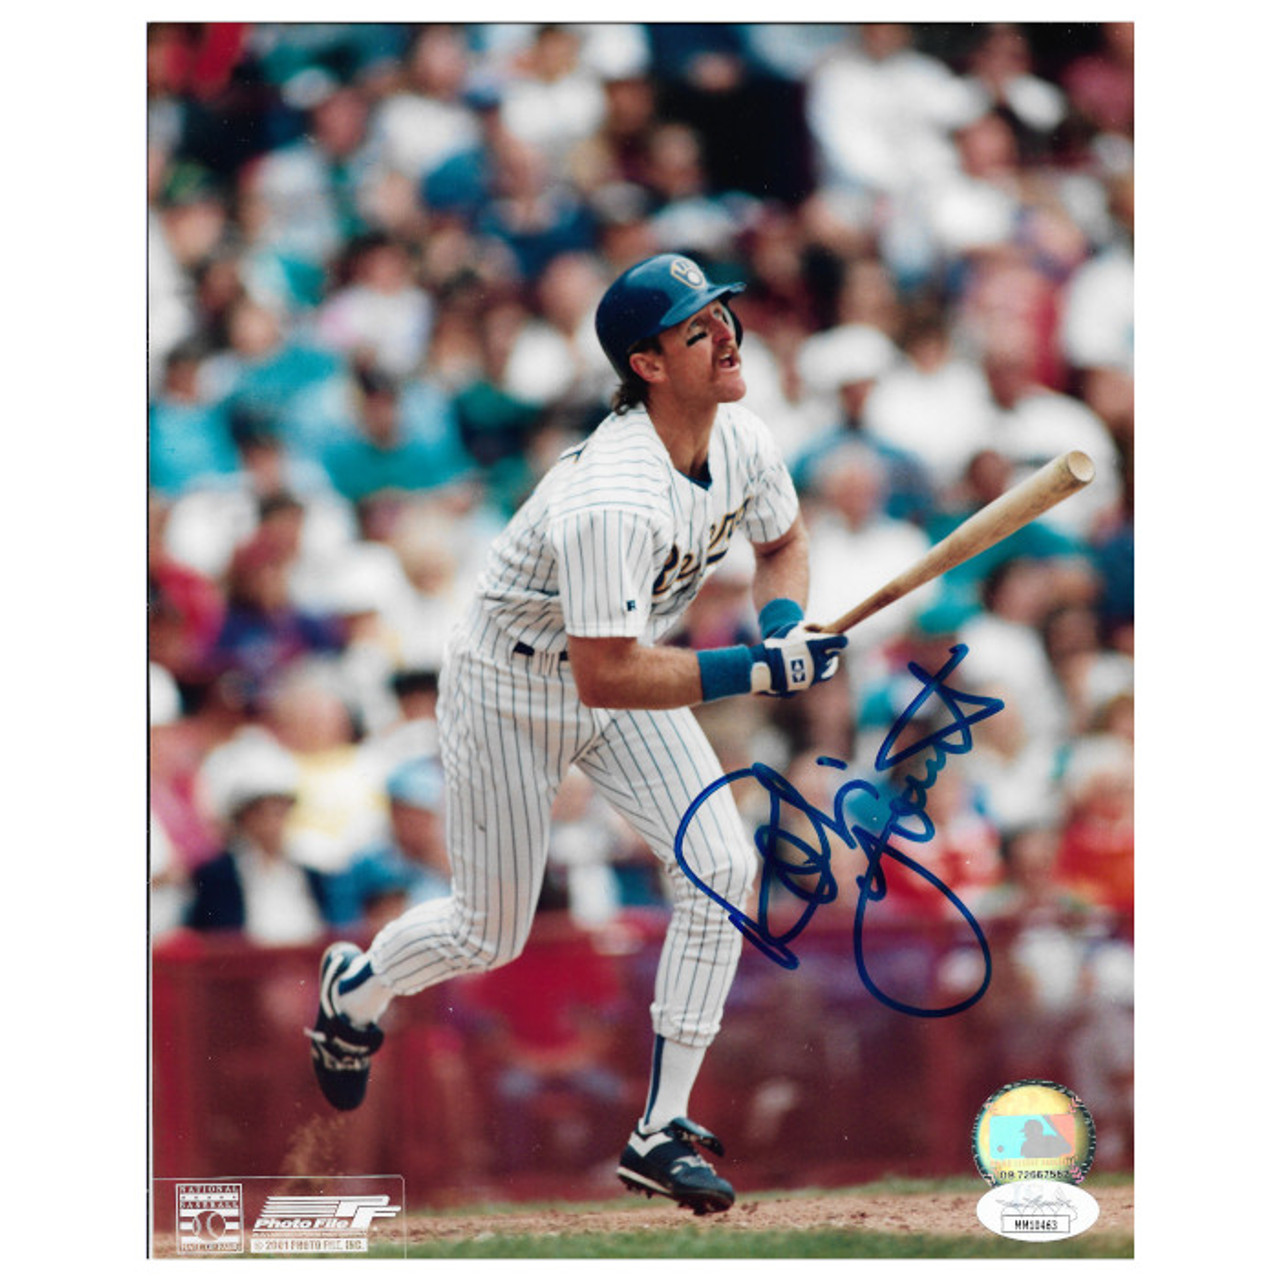 Robin Yount Autographed Memorabilia  Signed Photo, Jersey, Collectibles &  Merchandise